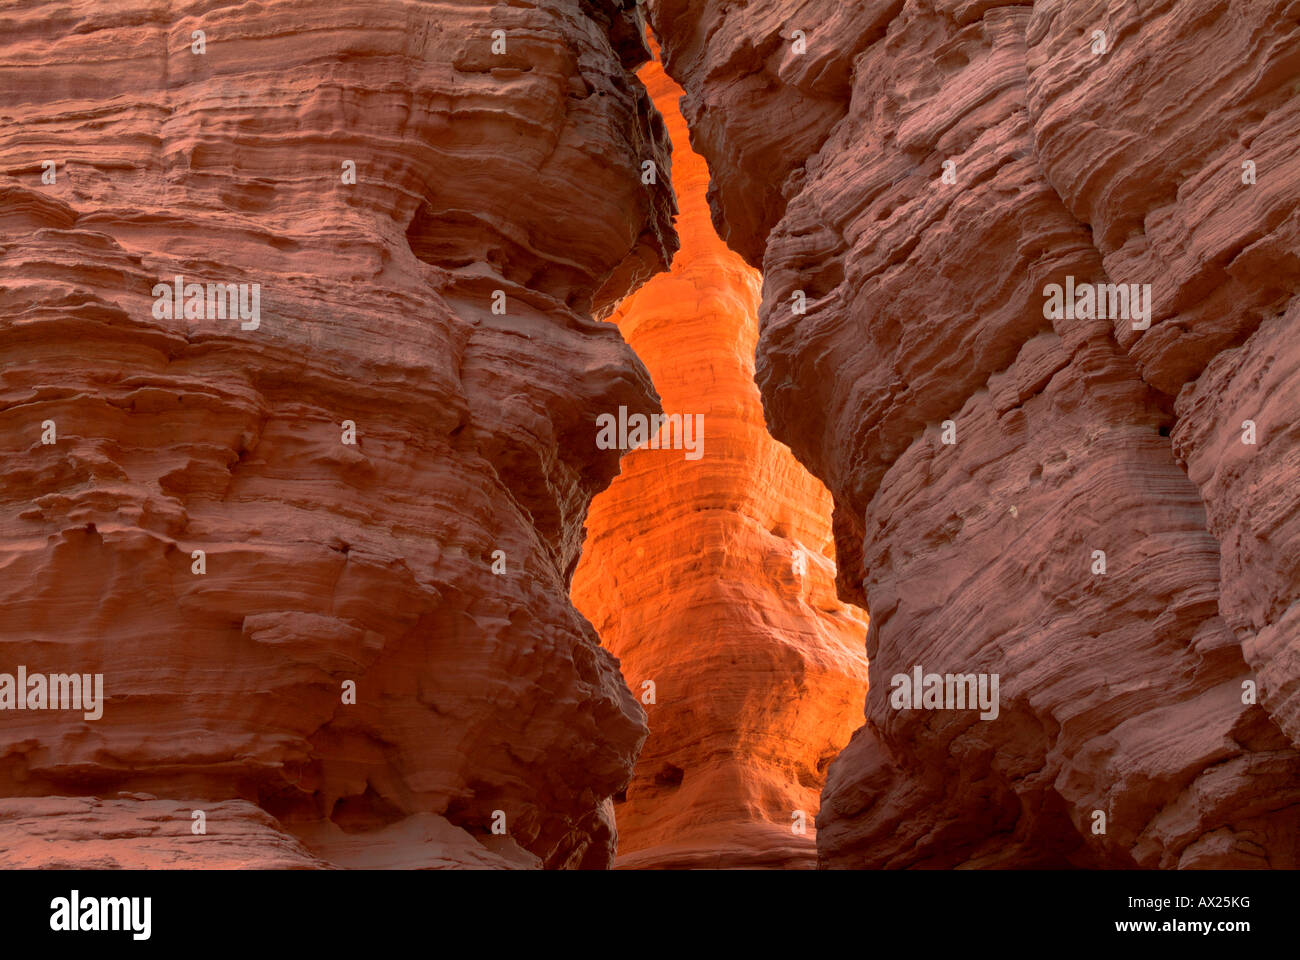 Rocks lit from behind by the setting sun, photographed through a crevasse, Altschlossfelsen rock formations, Pfaelzer Wald (Pal Stock Photo